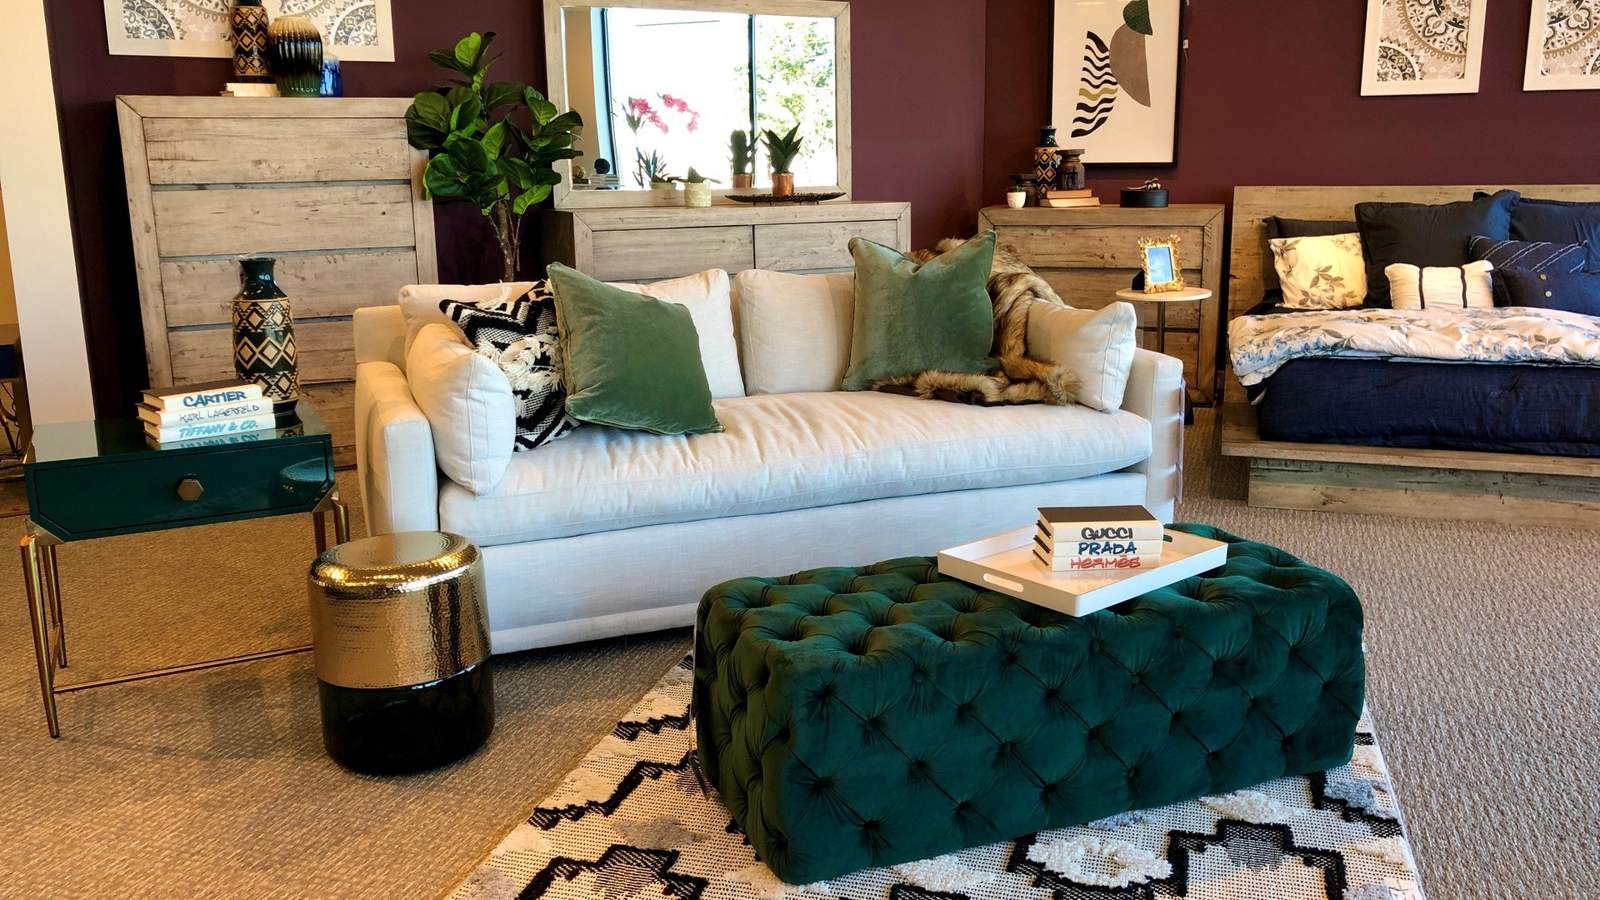 Here are some of the hottest furniture trends for your home